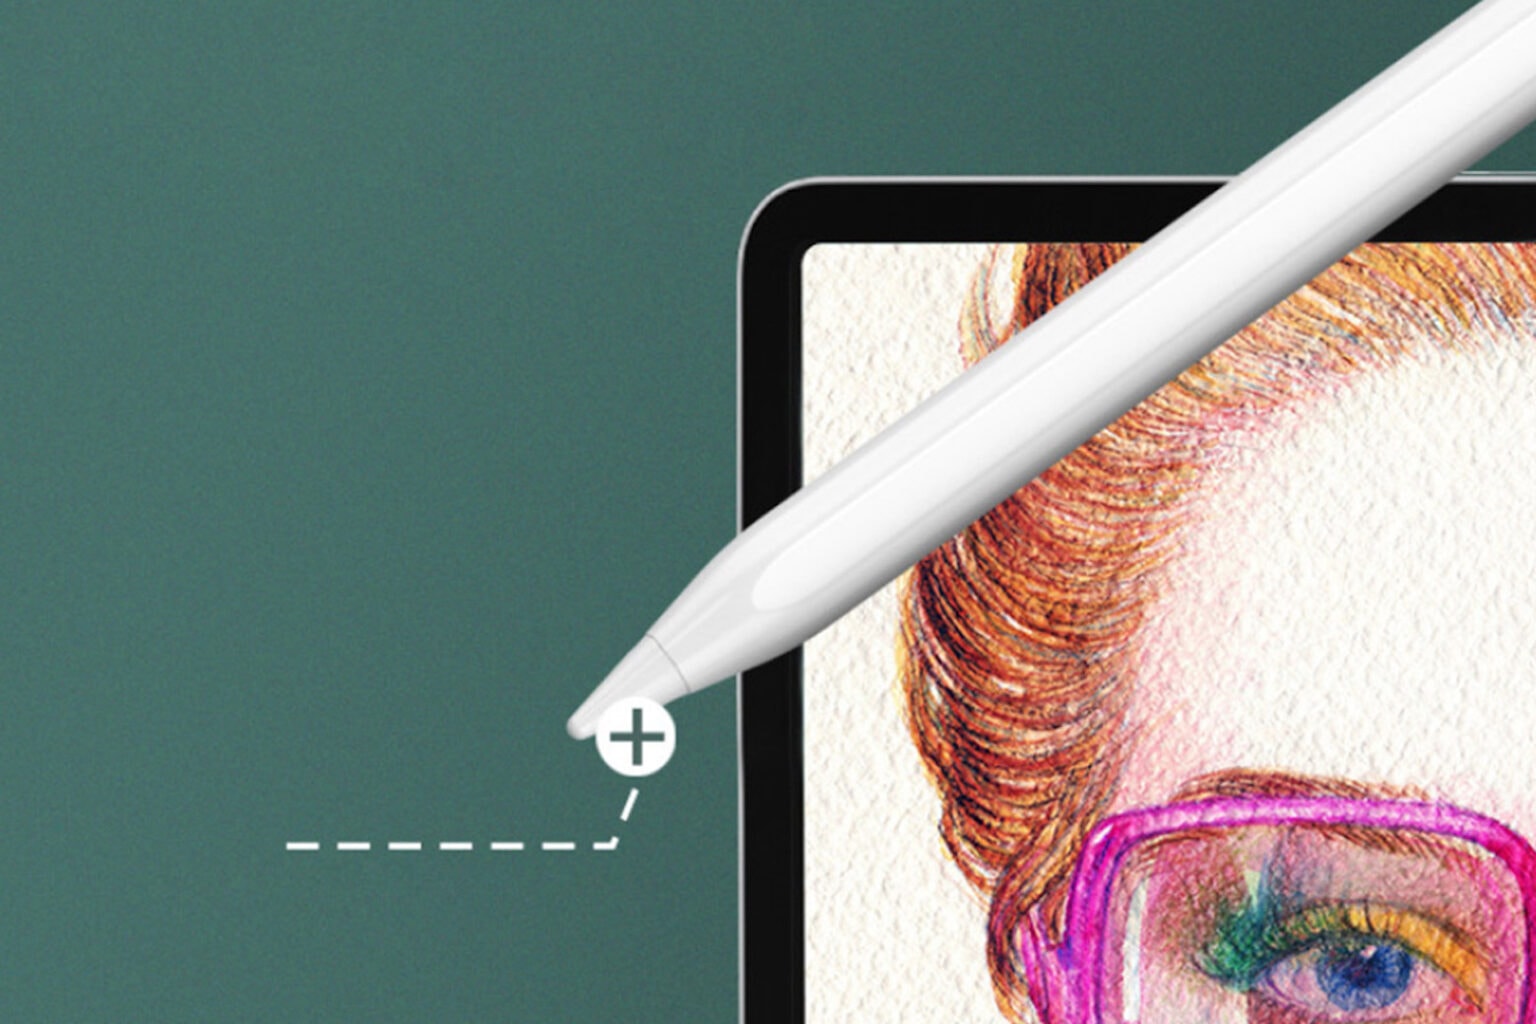 Transform your iPad into an art tablet with this $40 gadget.